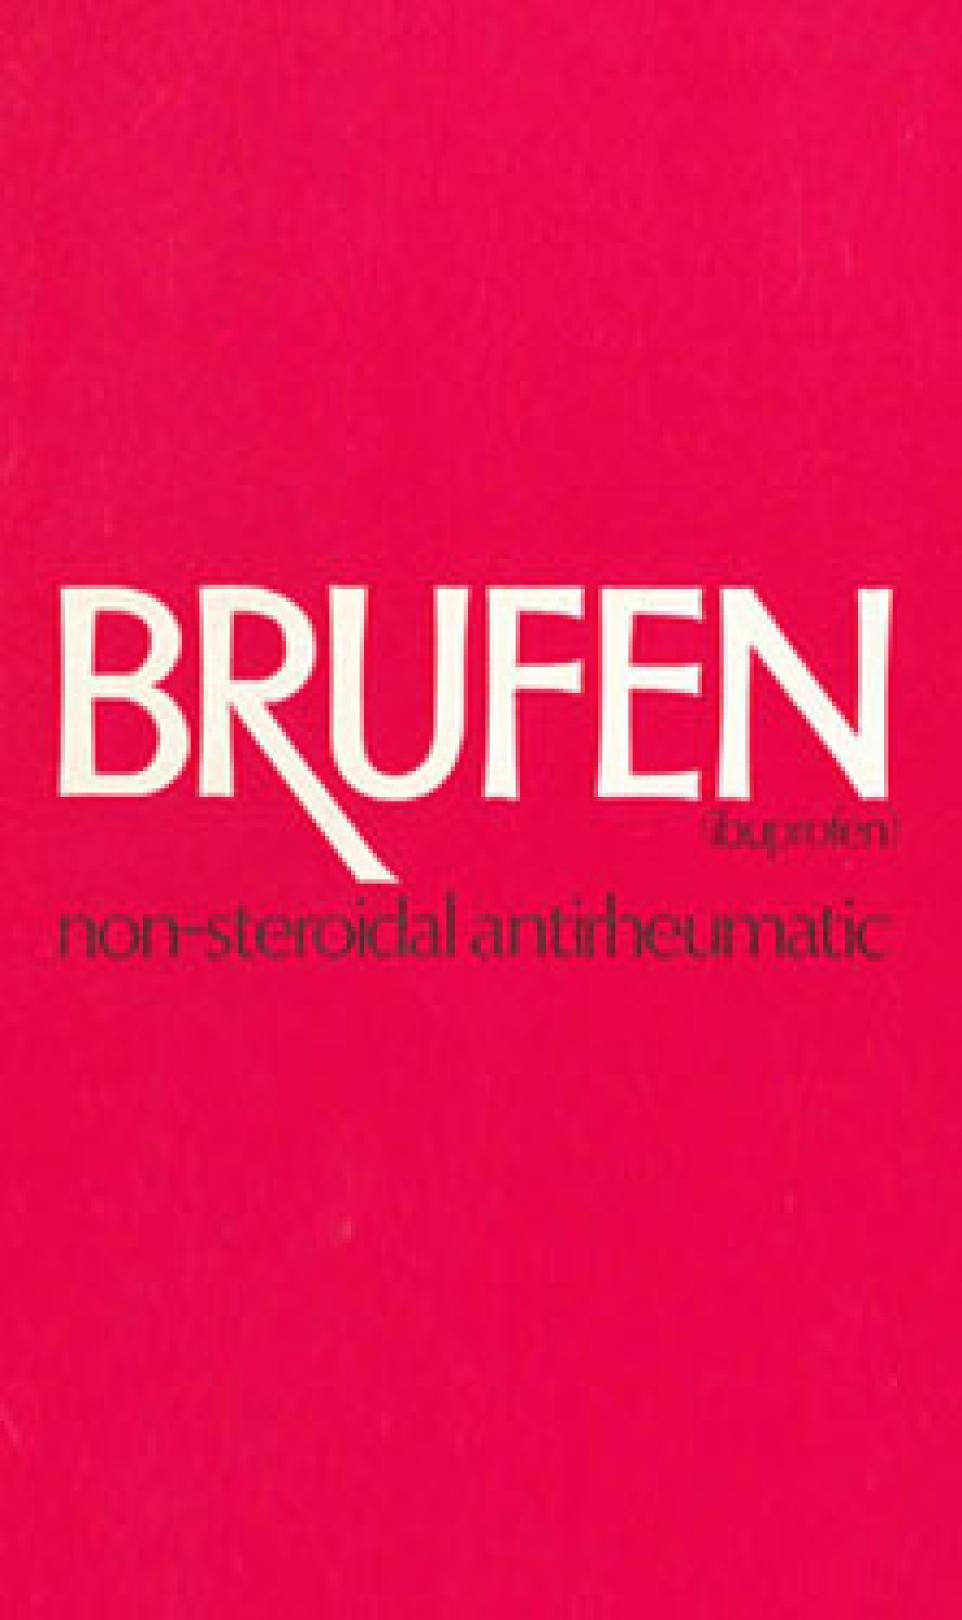 Picture of the red and white Ibuprofen (Brufen) packaging when it first launched in the UK